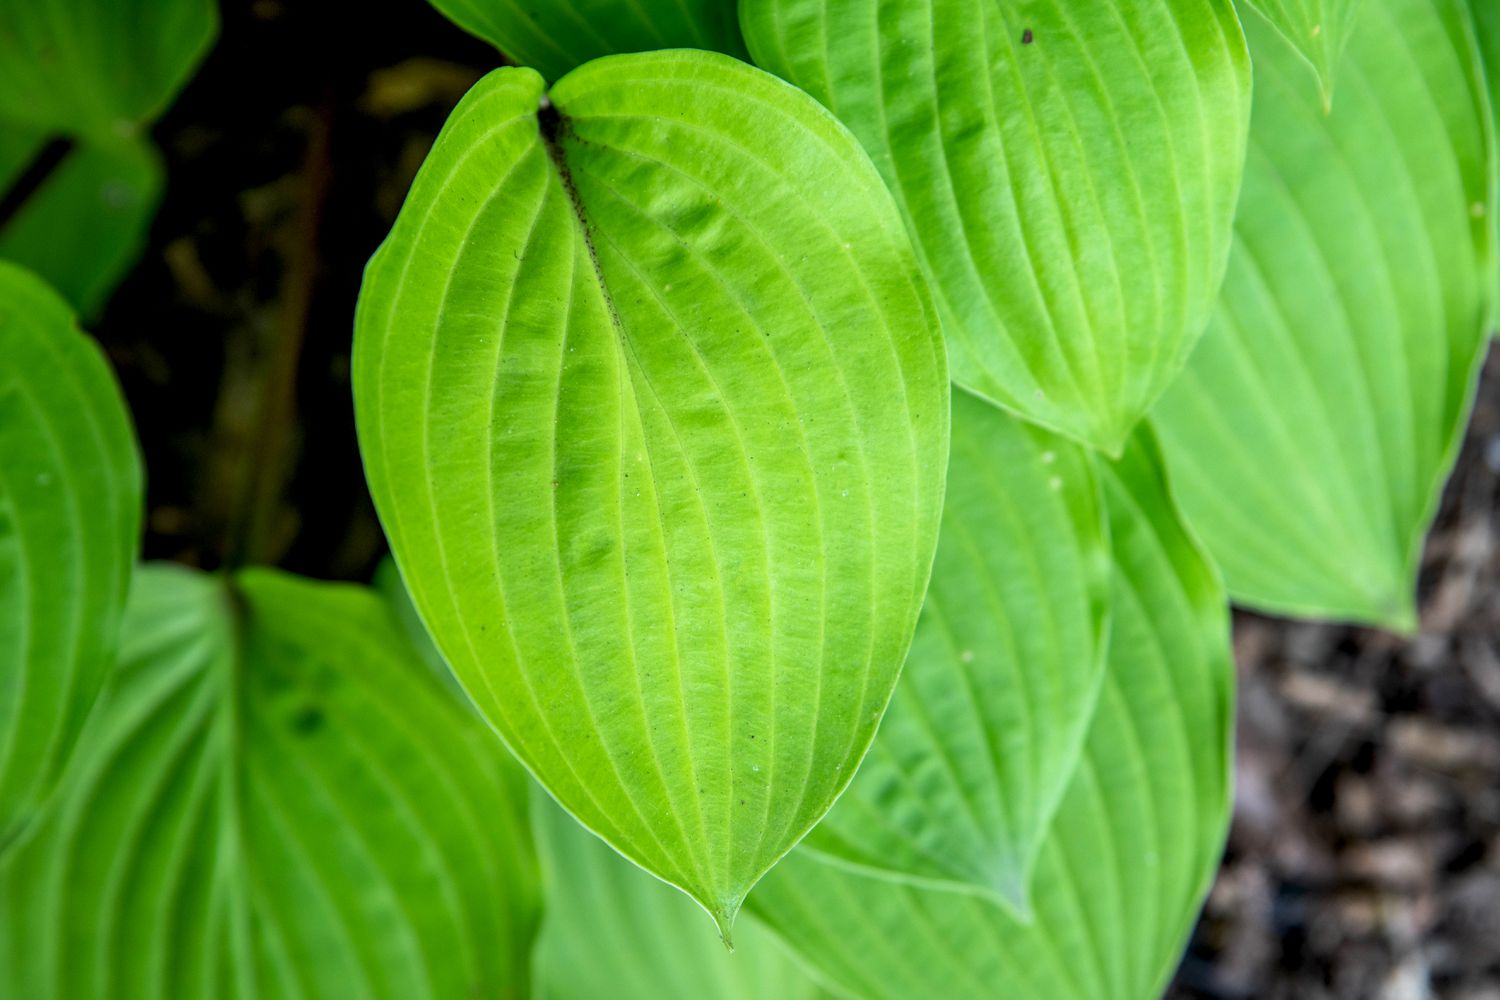 Fire island hosta plant with ribbed and bright green leaf closeup